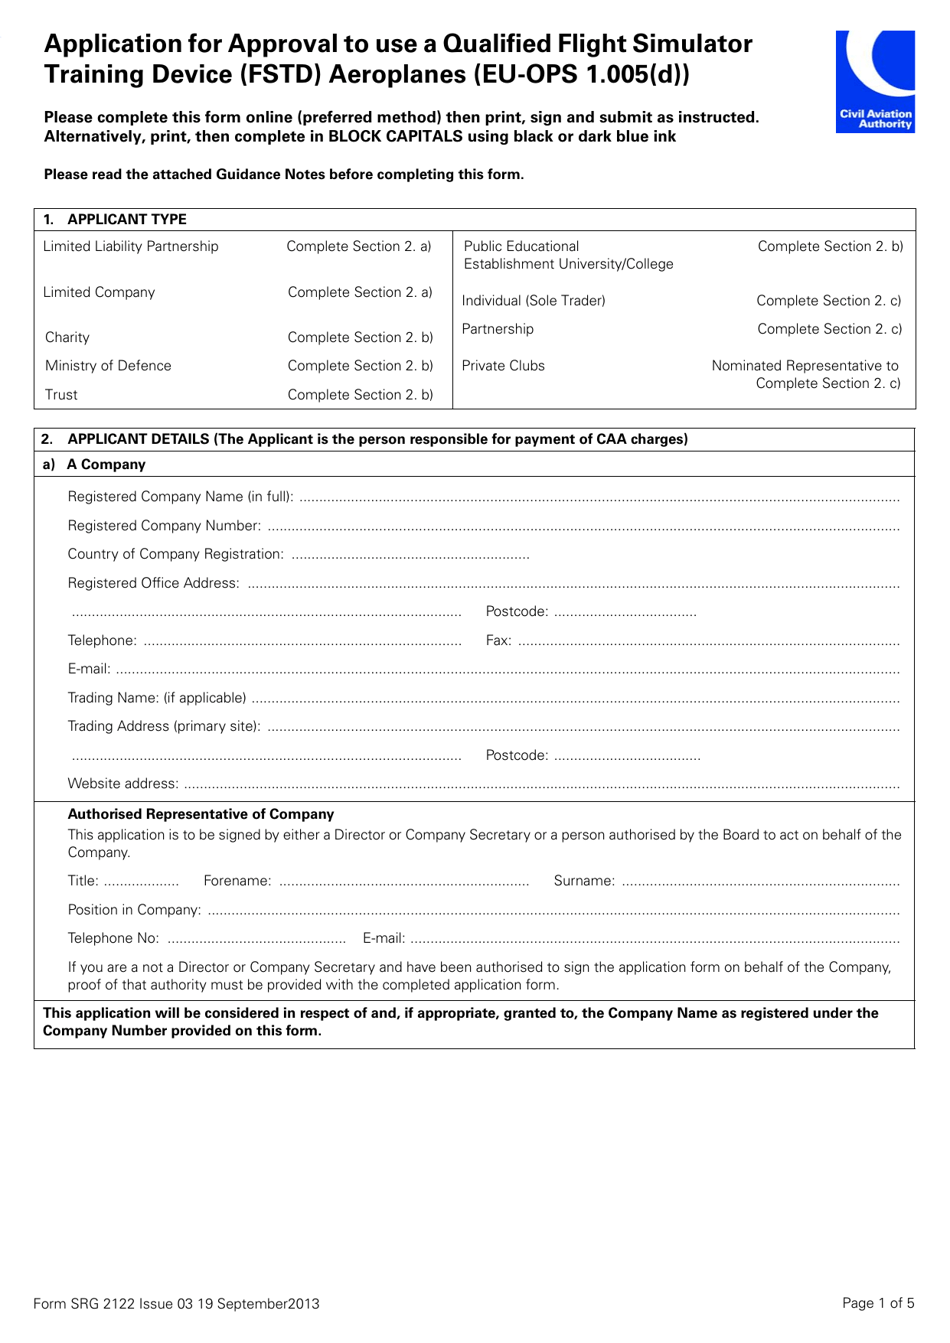 Form SRG2122 Application for Approval to Use a Qualified Flight Simulator Training Device (Fstd) Aeroplanes (Eu-Ops 1.005(D)) - United Kingdom, Page 1